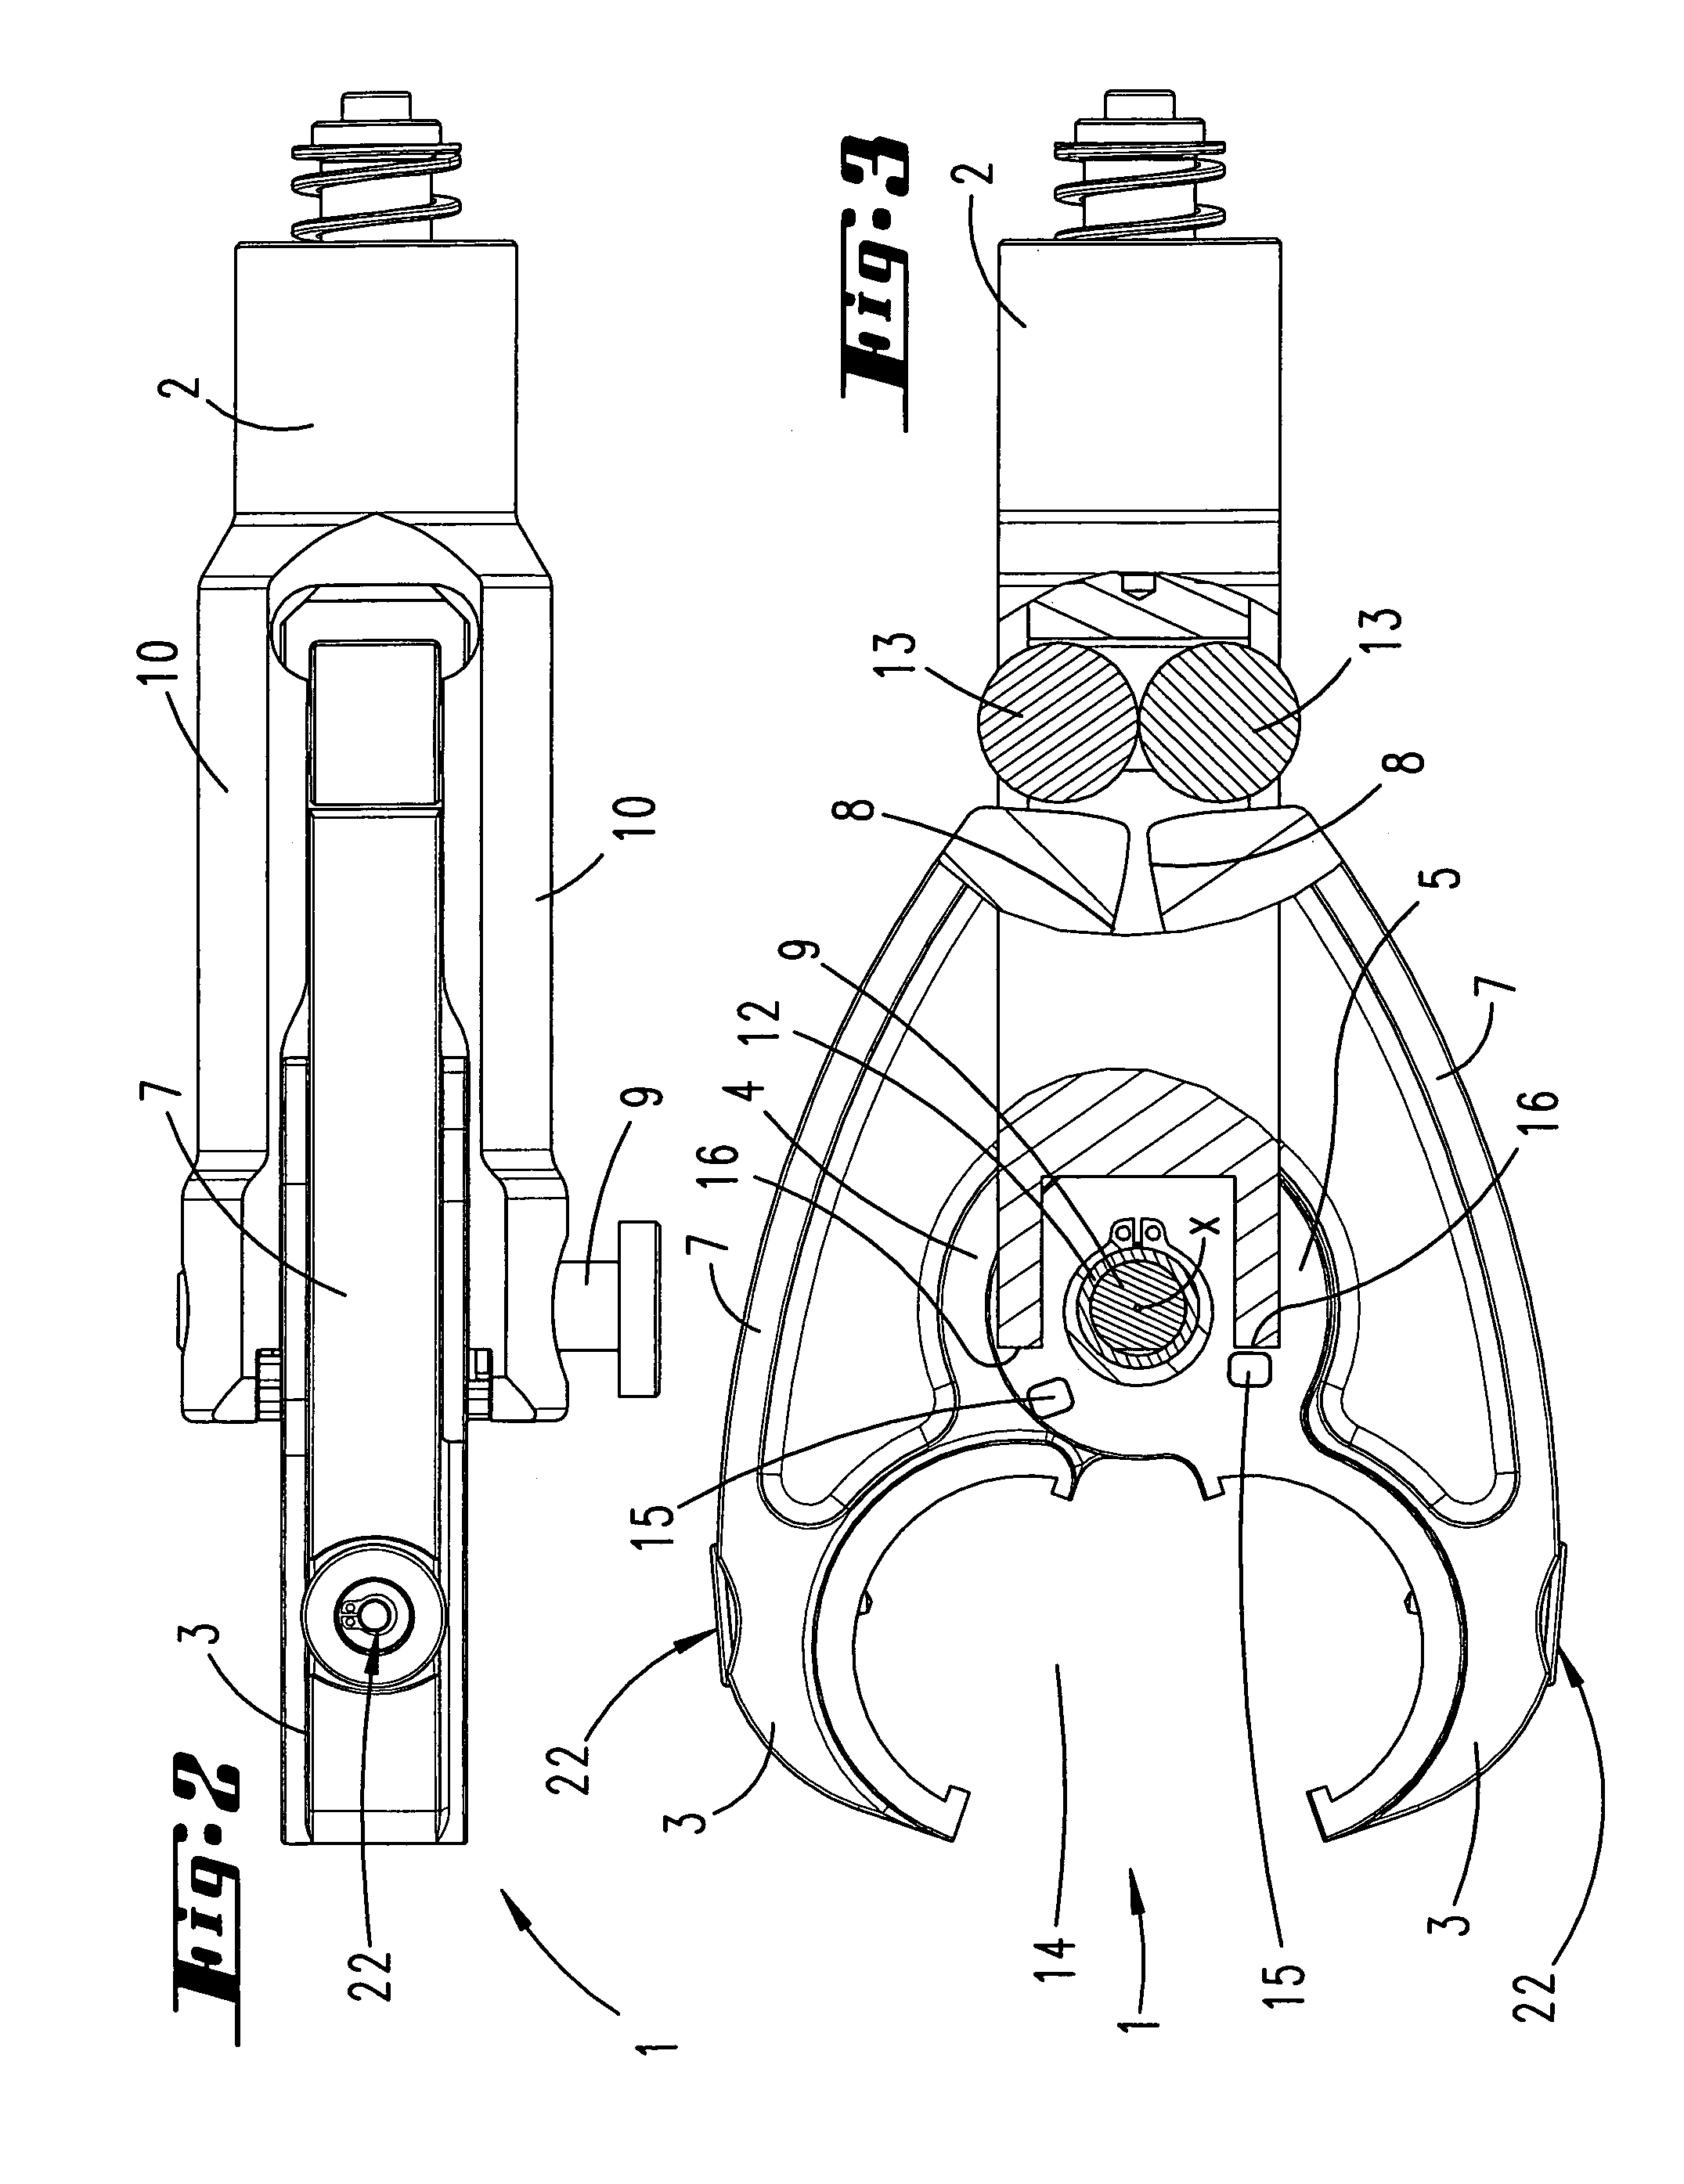 Pair of pressing jaws for hydraulic or electric pressing tools, and insulating covering for a pressing jaw